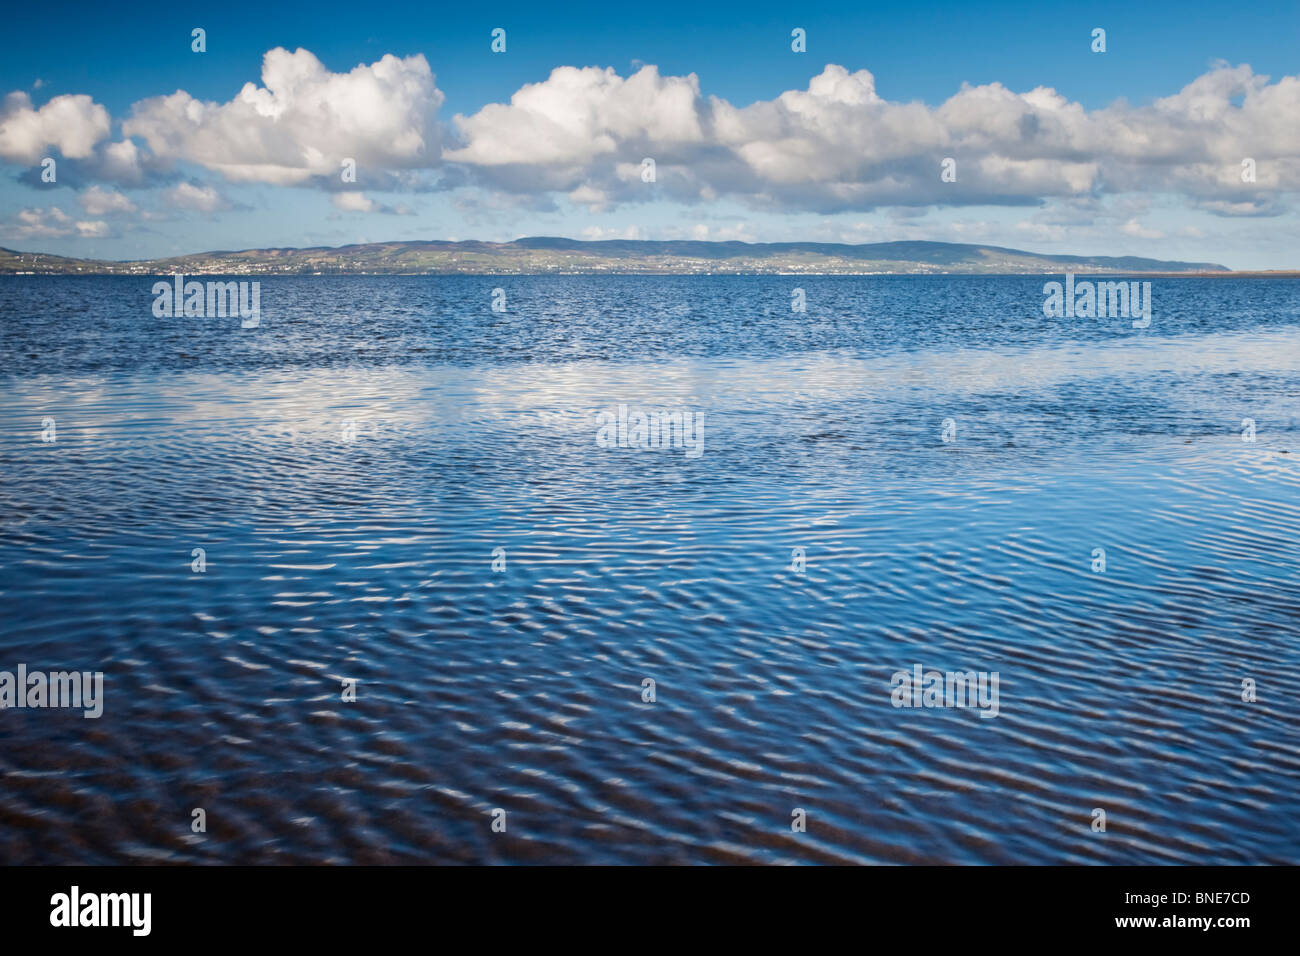 The incoming tide flowing into Lough Foyle near Balls Point at the mouth of the River Roe, County Derry, Northern Ireland Stock Photo